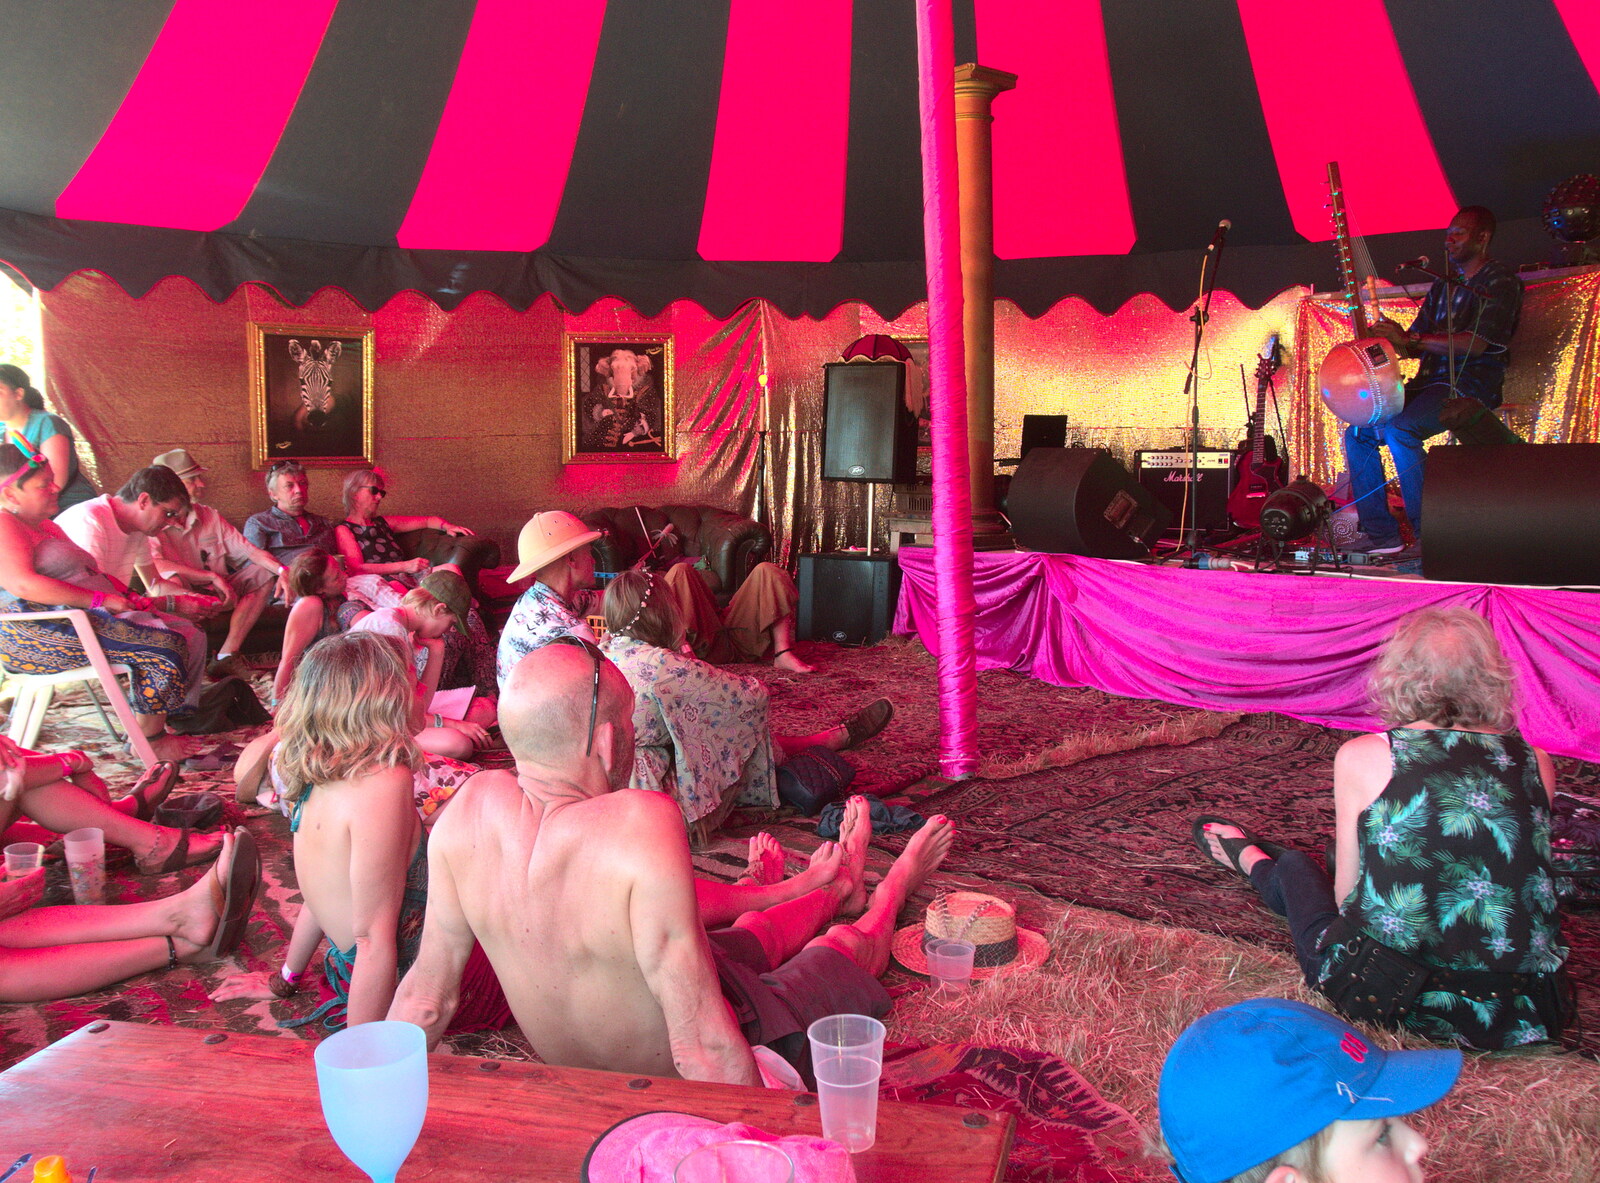 The Maui Waui lounge at WoW from WoW Festival, Burston, Norfolk - 29th June - 1st July 2018